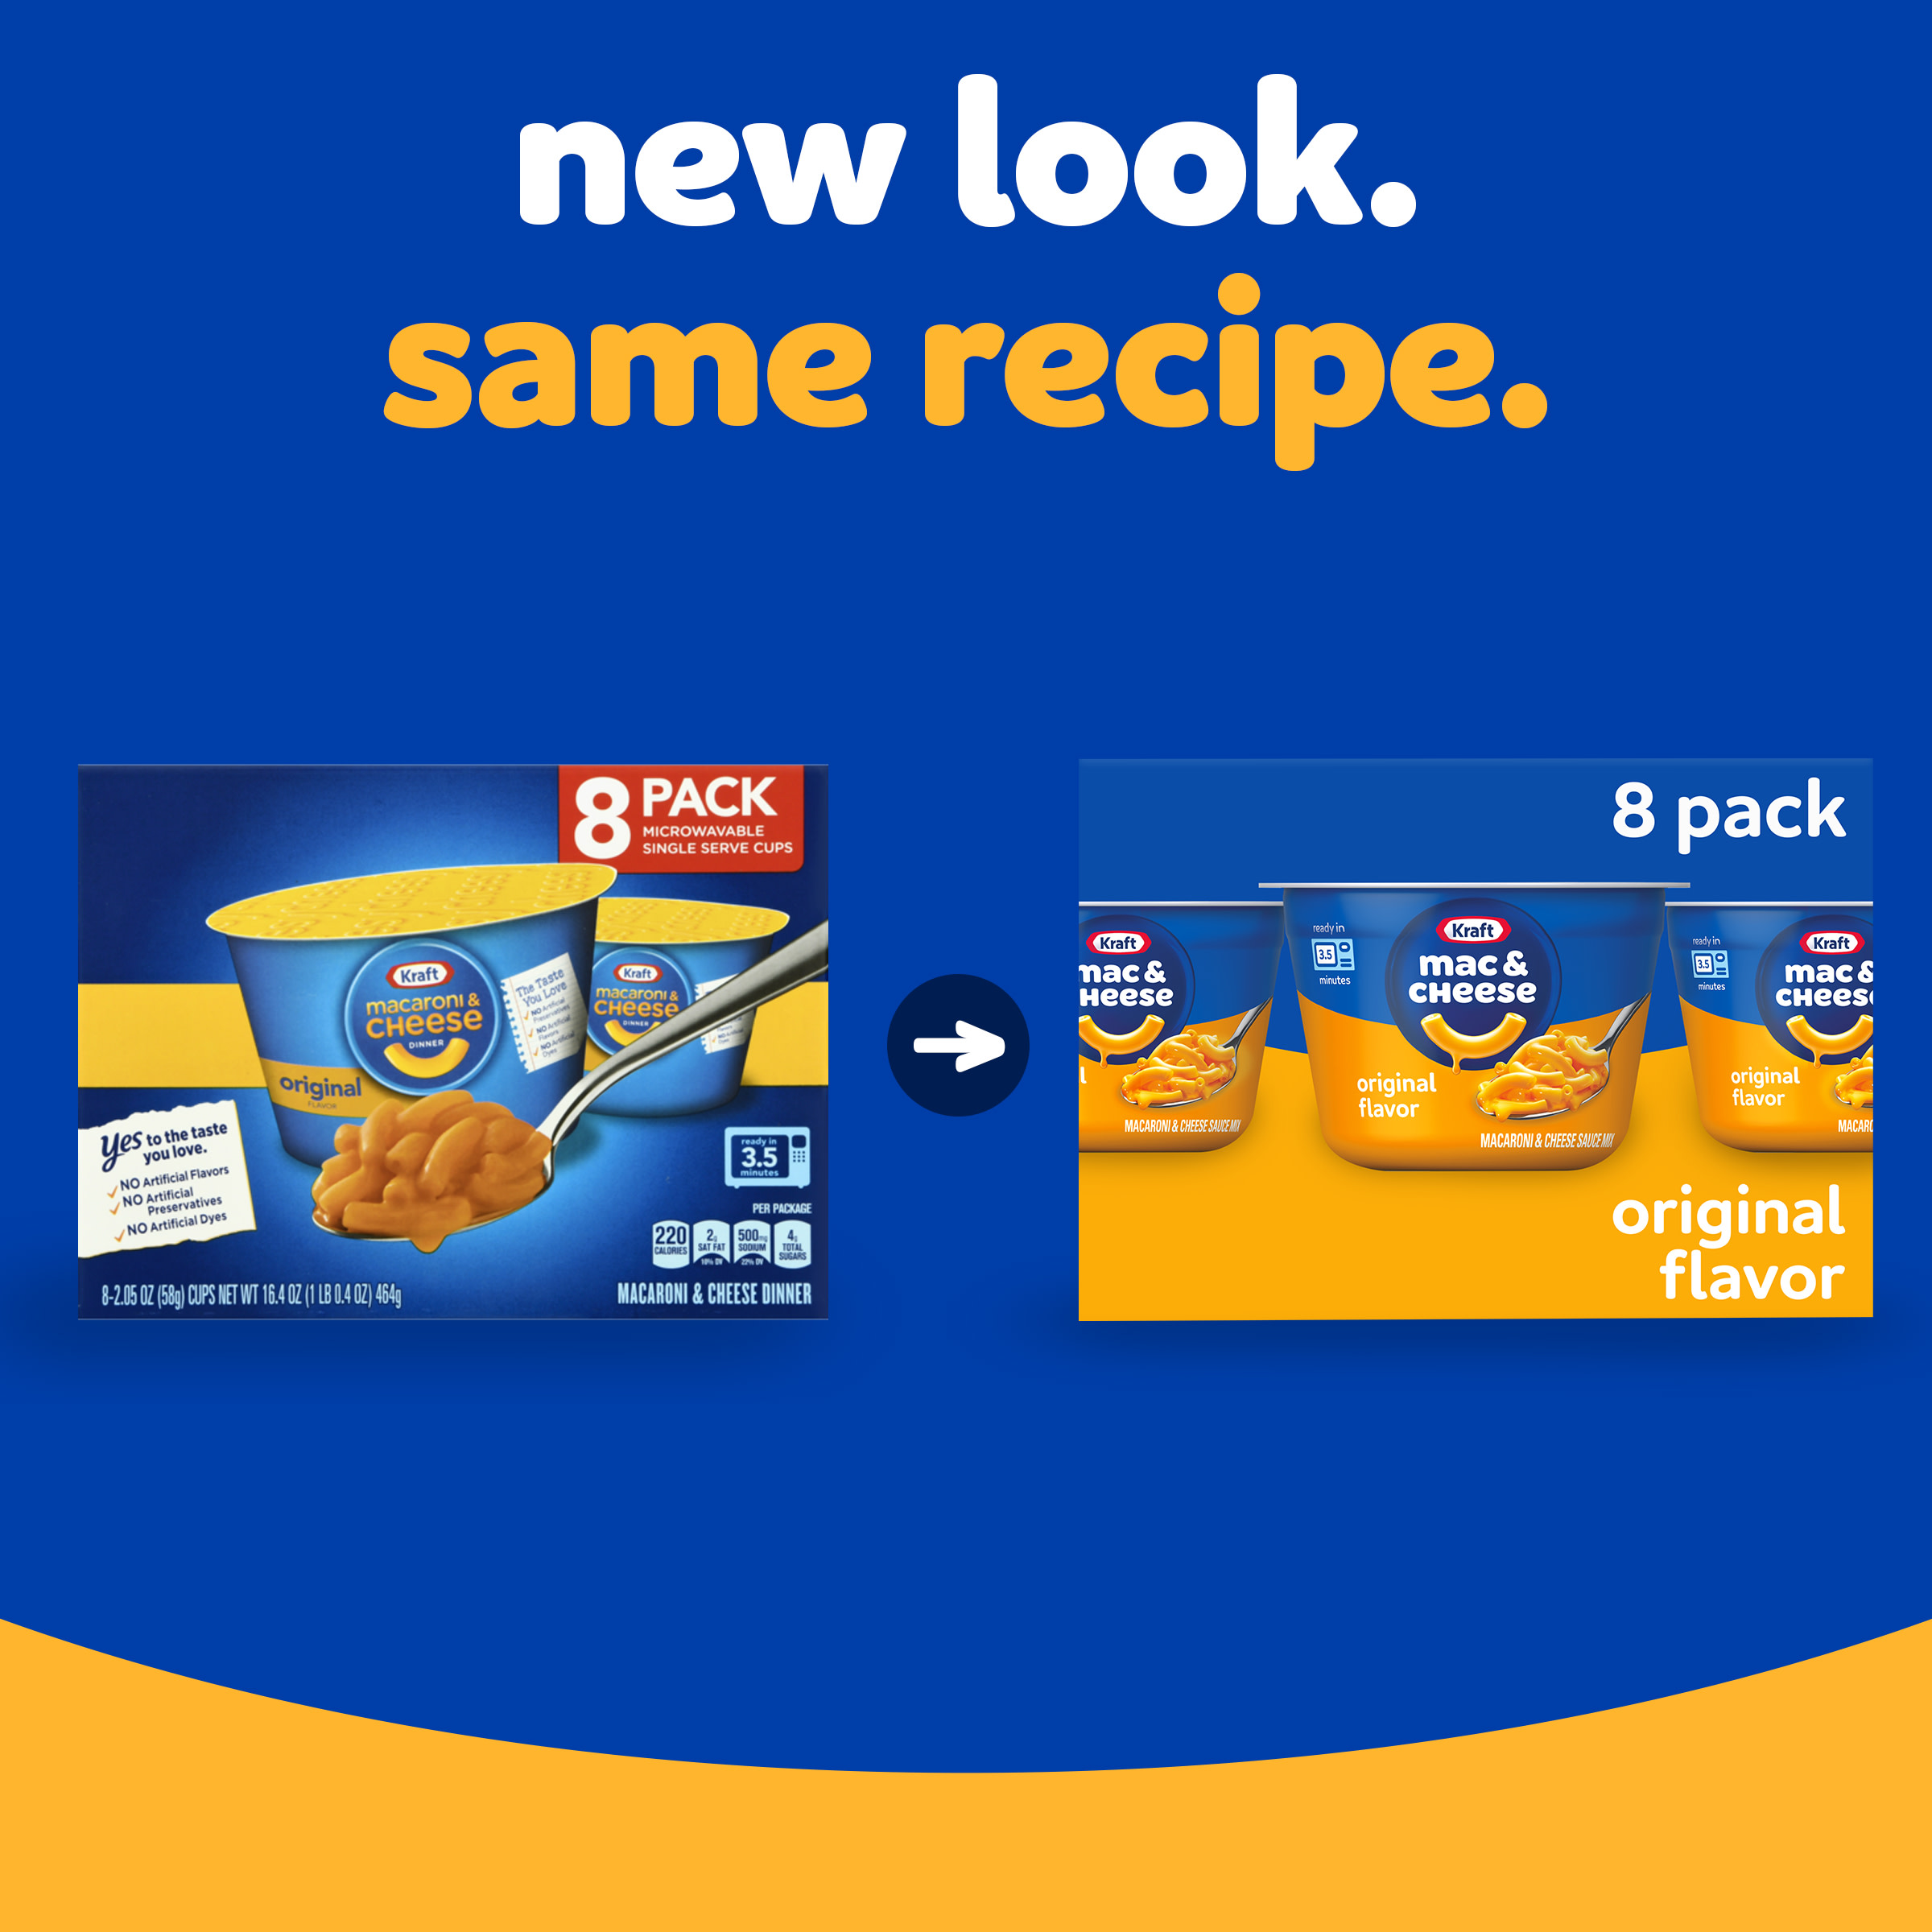 (2 pack) Kraft Original Mac N Cheese Macaroni and Cheese Cups Easy Microwavable Dinner, 8 ct Box, 2.05 oz Cups - image 4 of 21